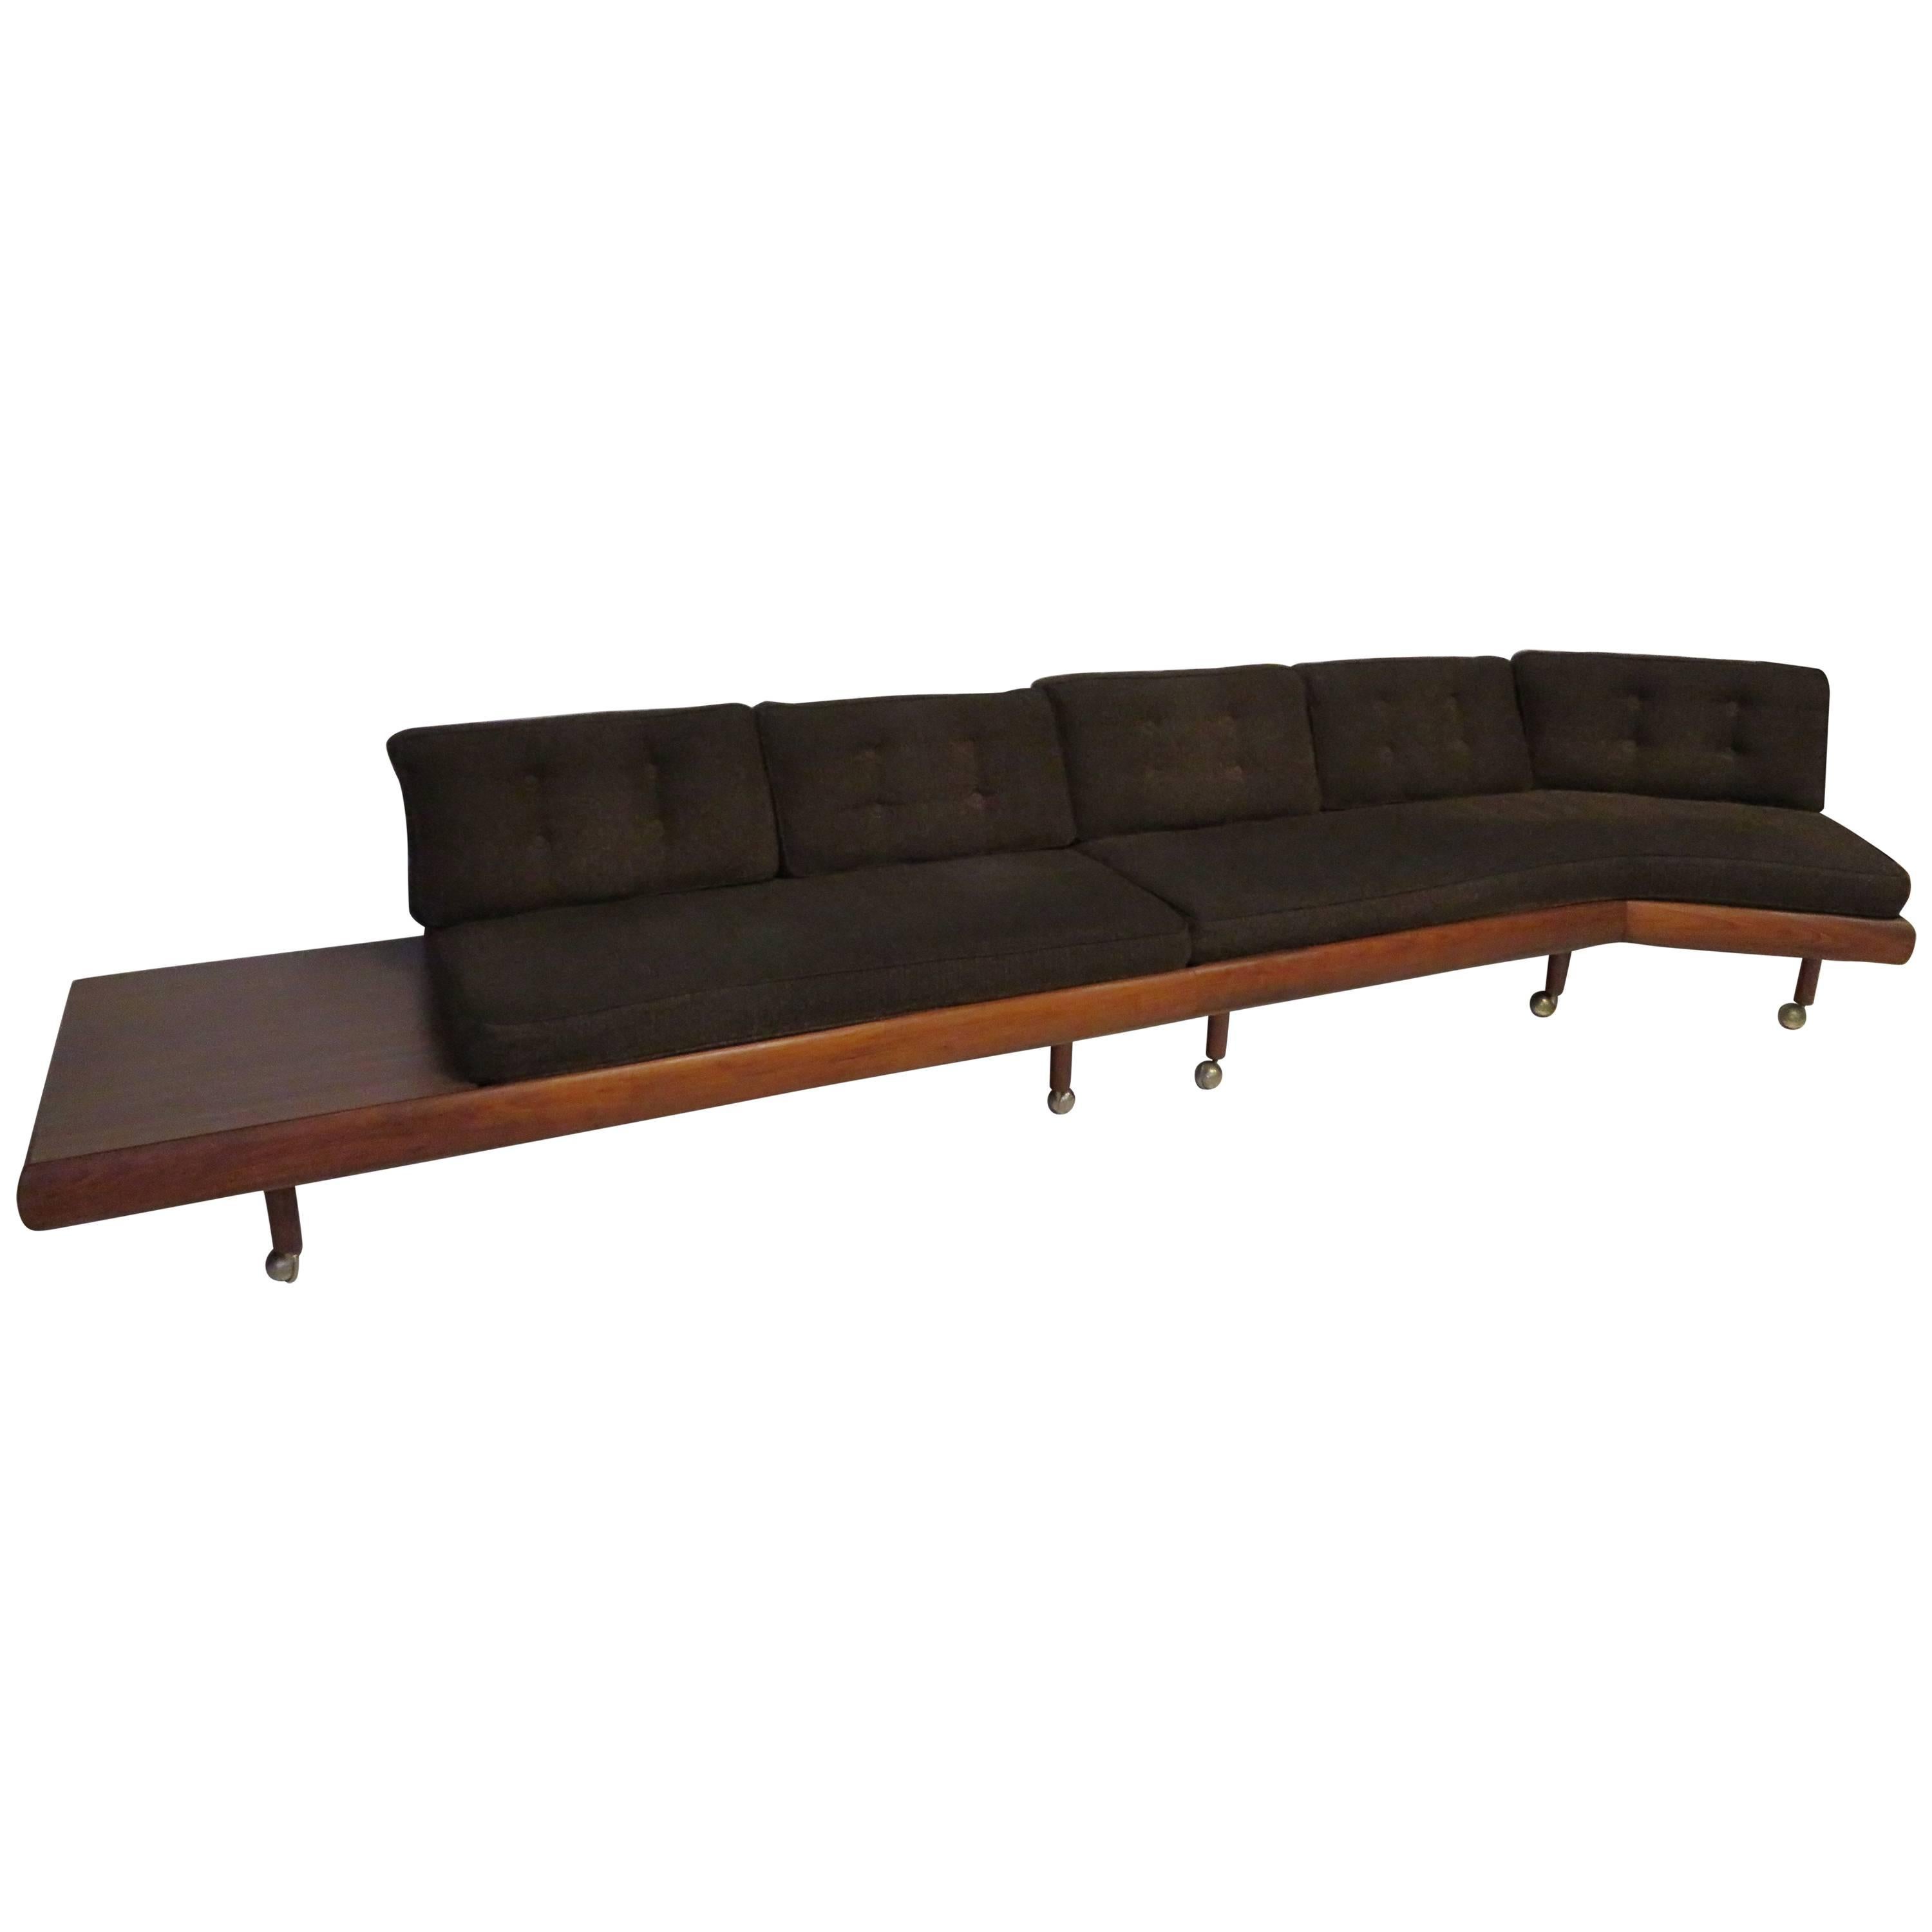 Unusual Two-Piece Adrian Pearsall Sofa Sectional Boomerang Mid-Century Modern For Sale